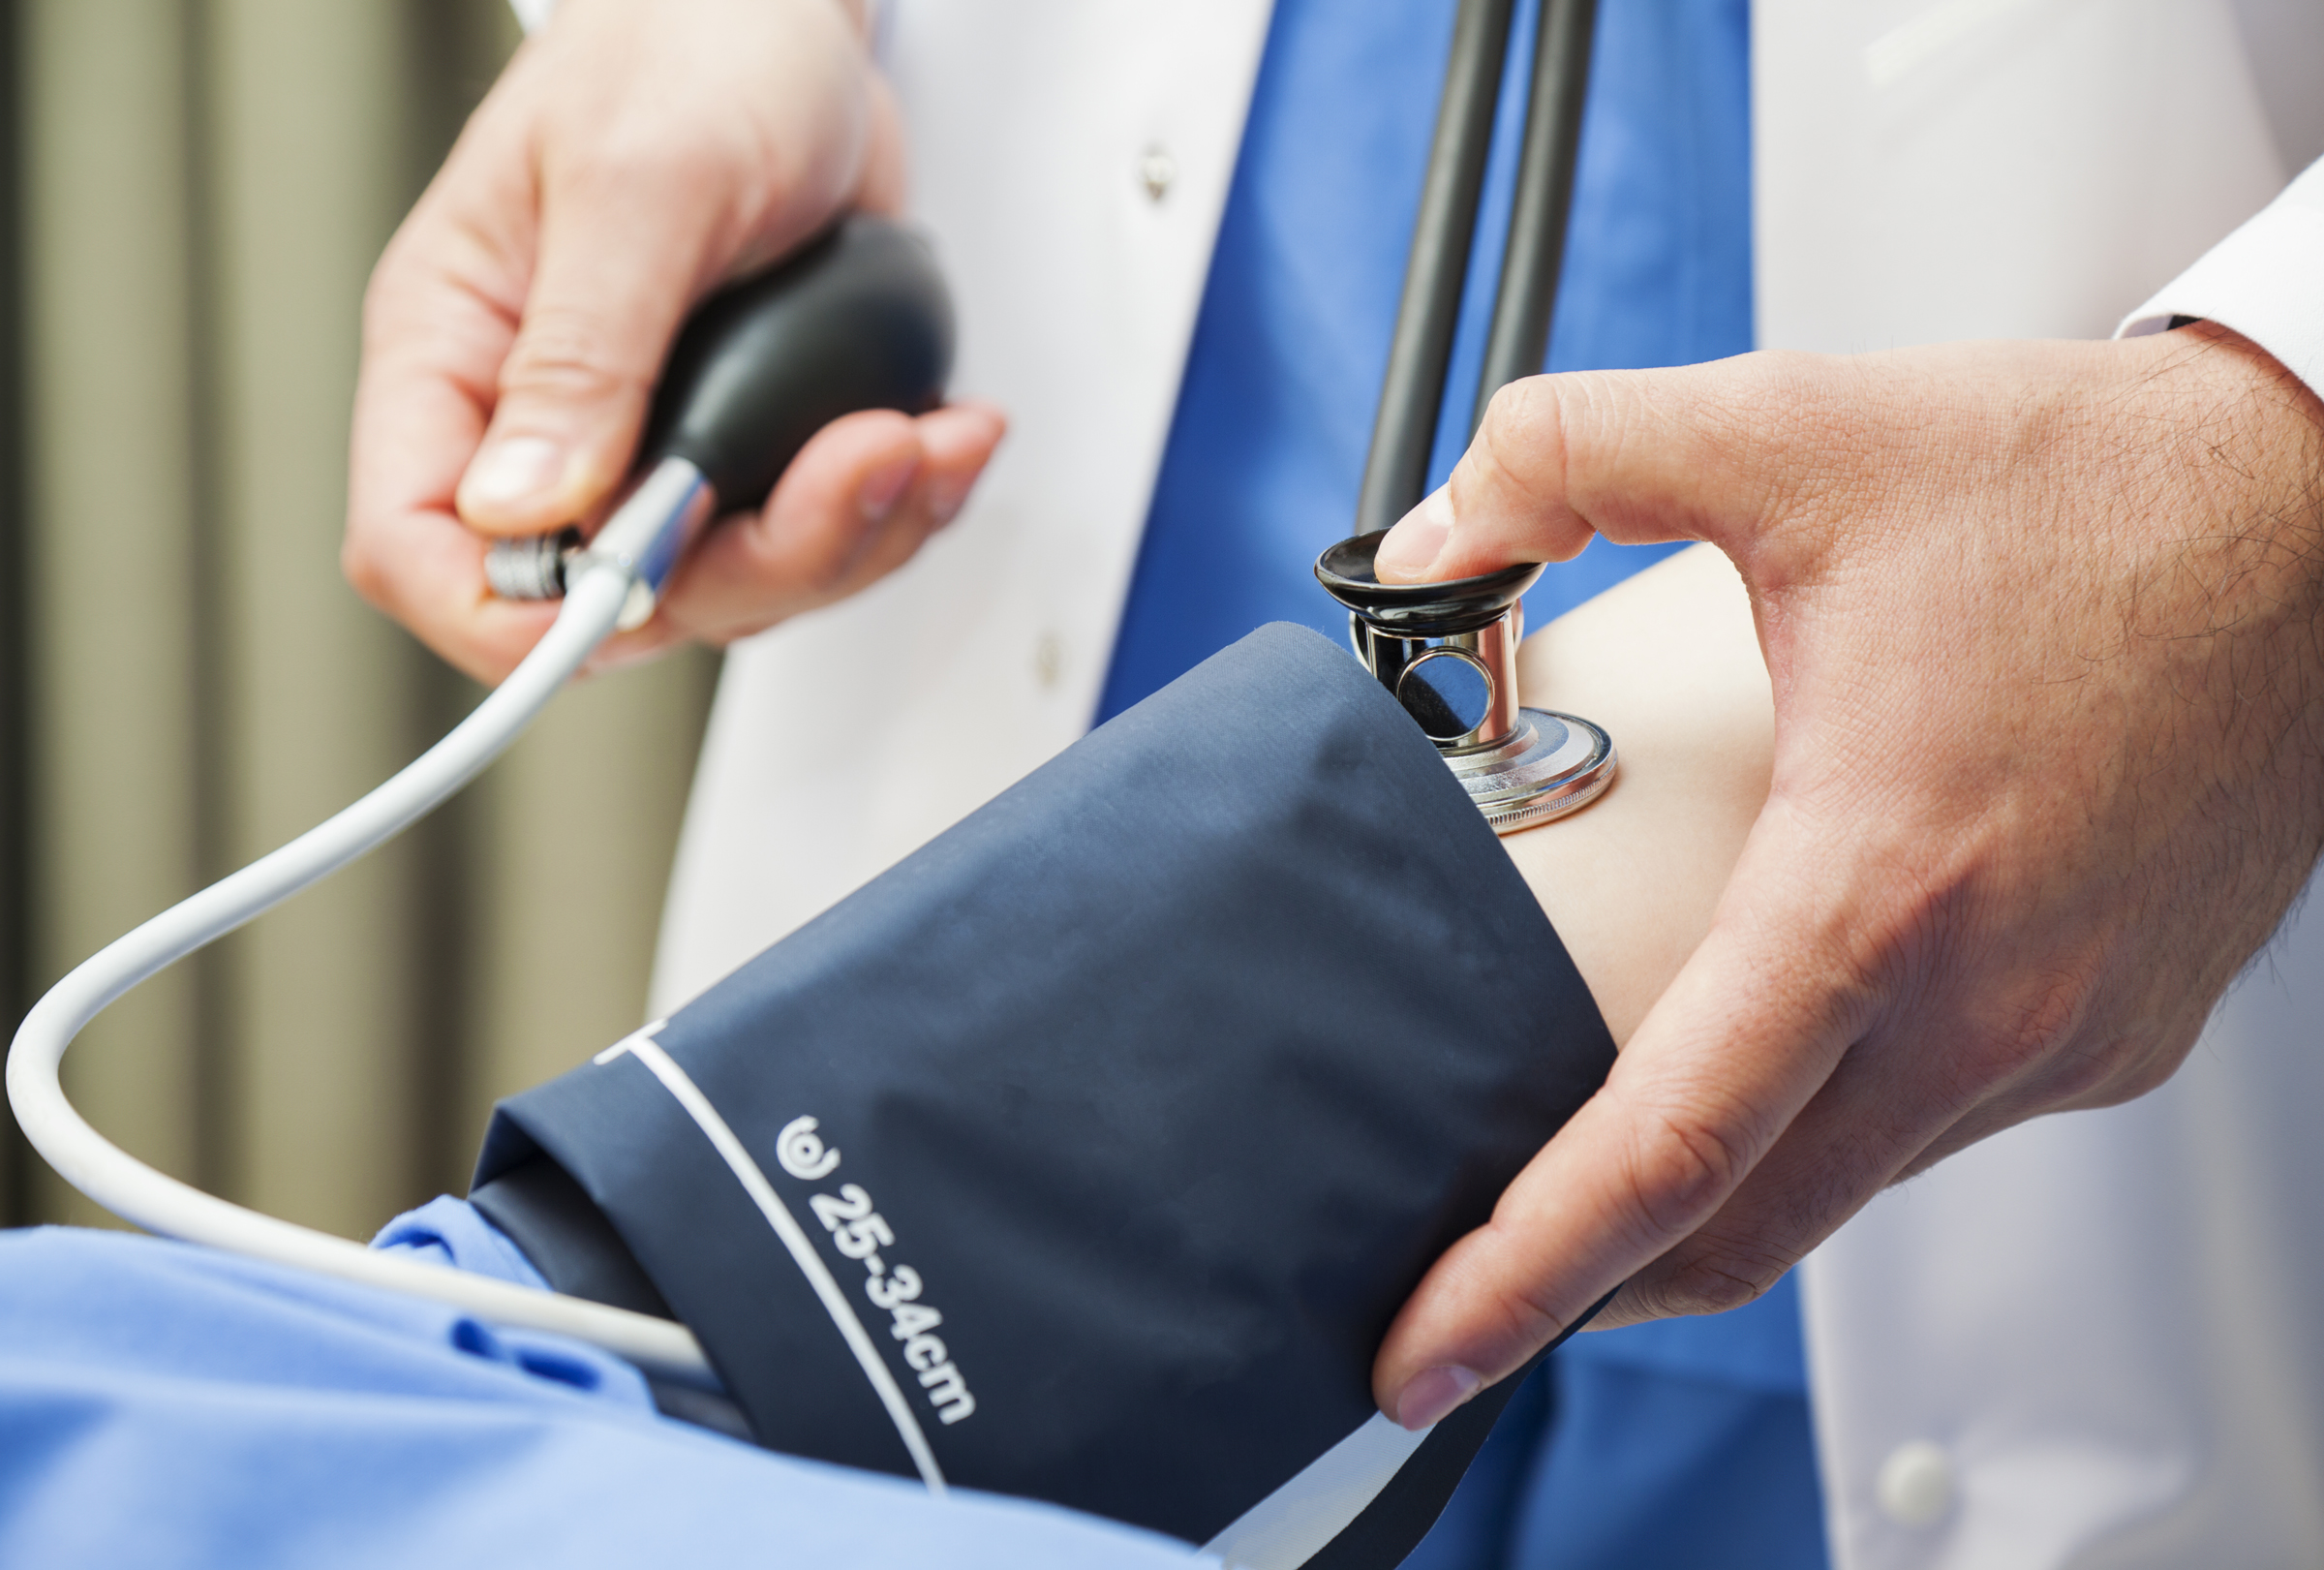 Cardiology 101: What Does Blood Pressure Really Mean?